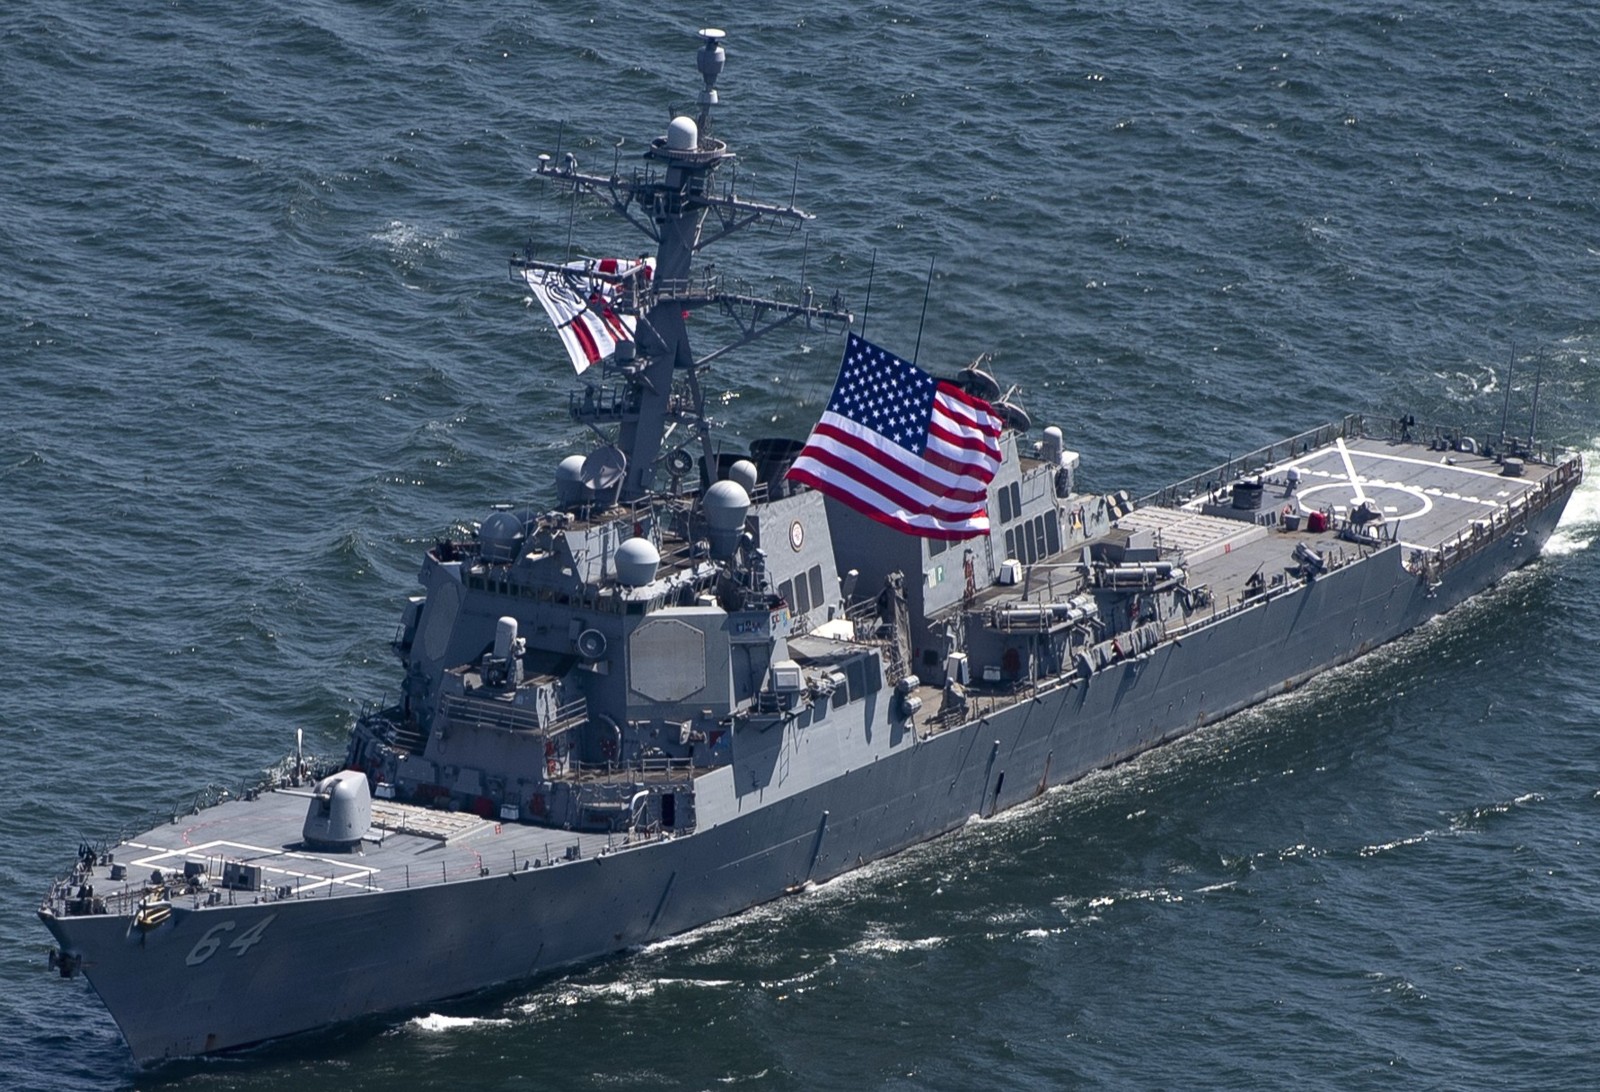 ddg-64 uss carney guided missile destroyer arleigh burke class 106